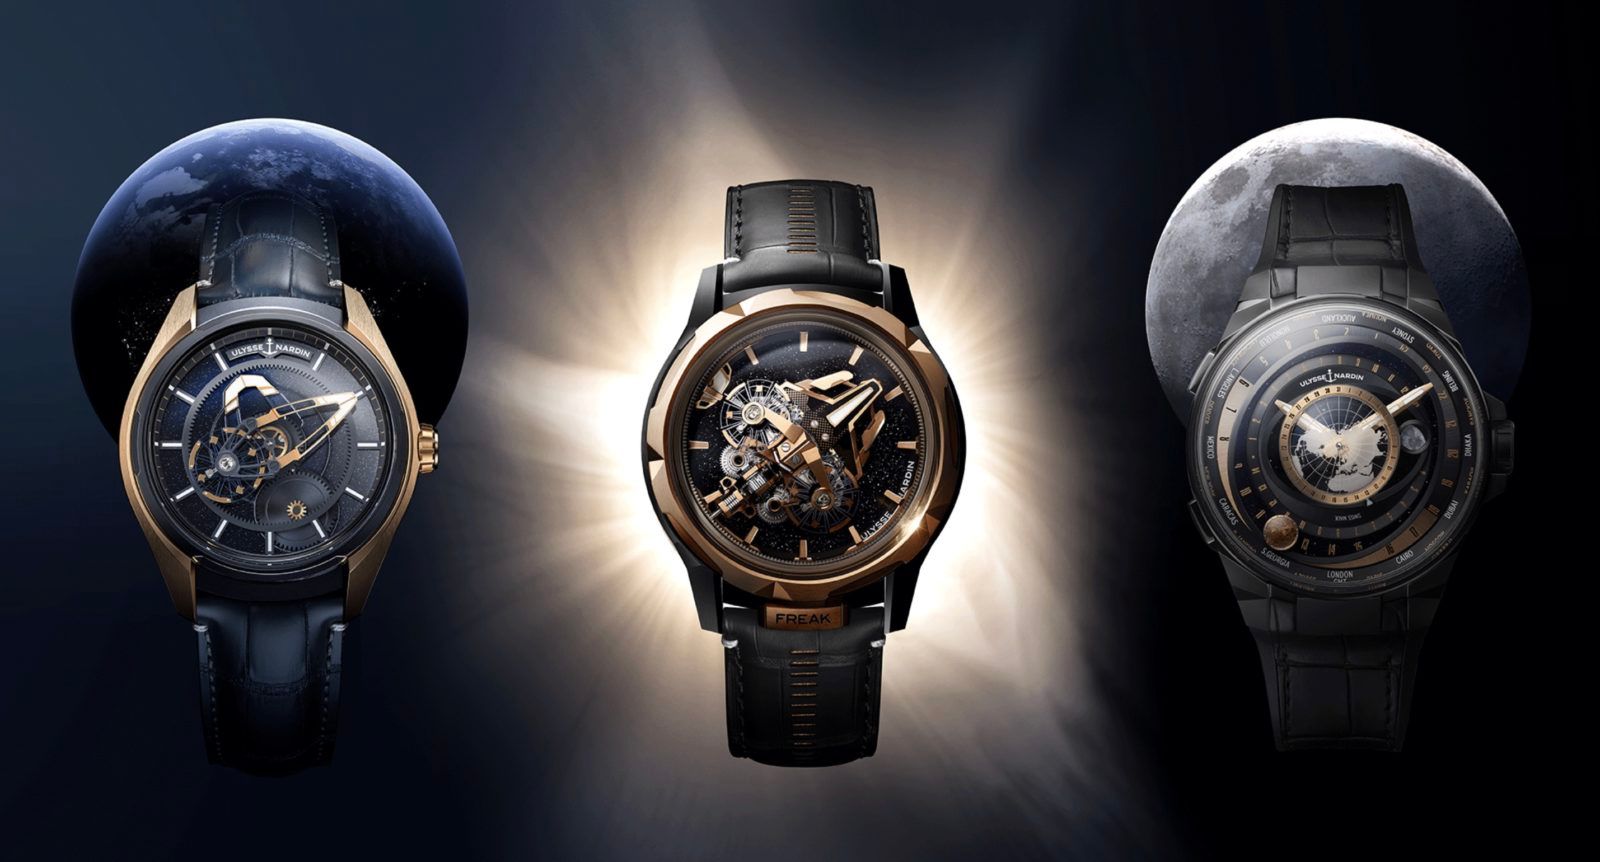 Watches & Wonders 2022: Take off with Ulysse Nardin’s new Freak S